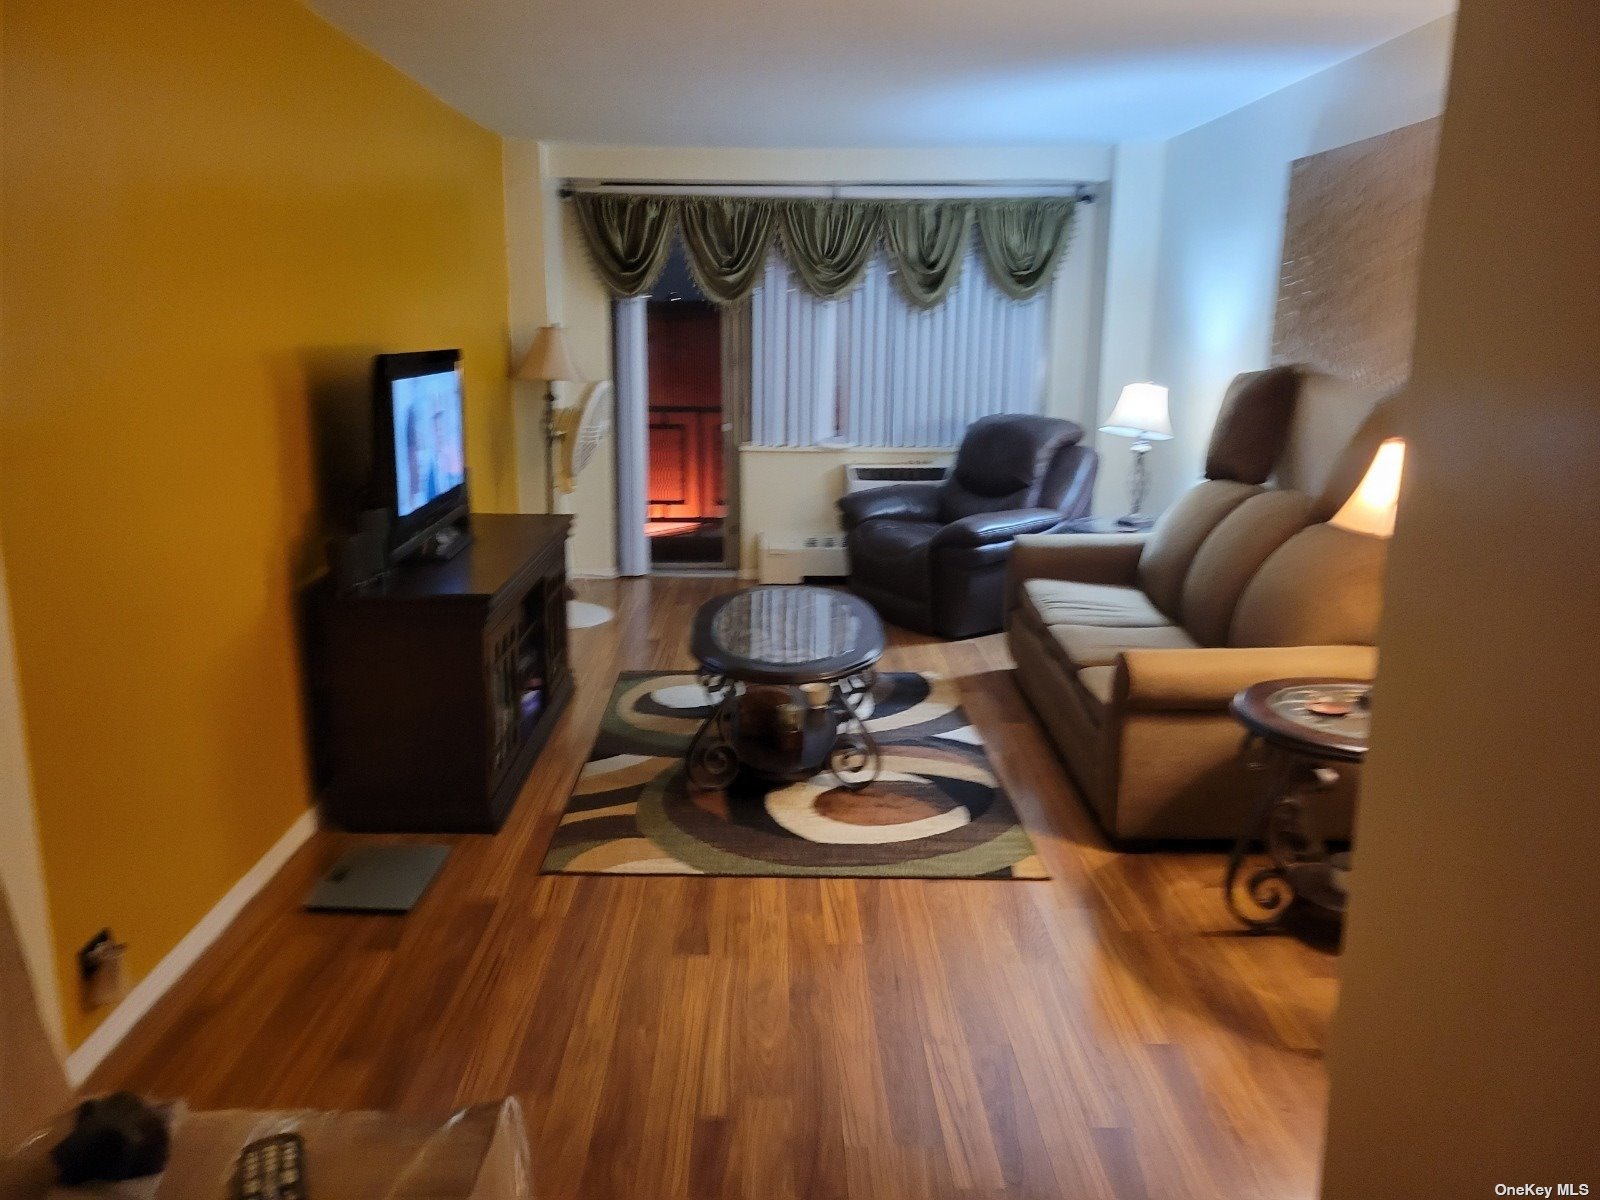 a living room with furniture and a wooden floor